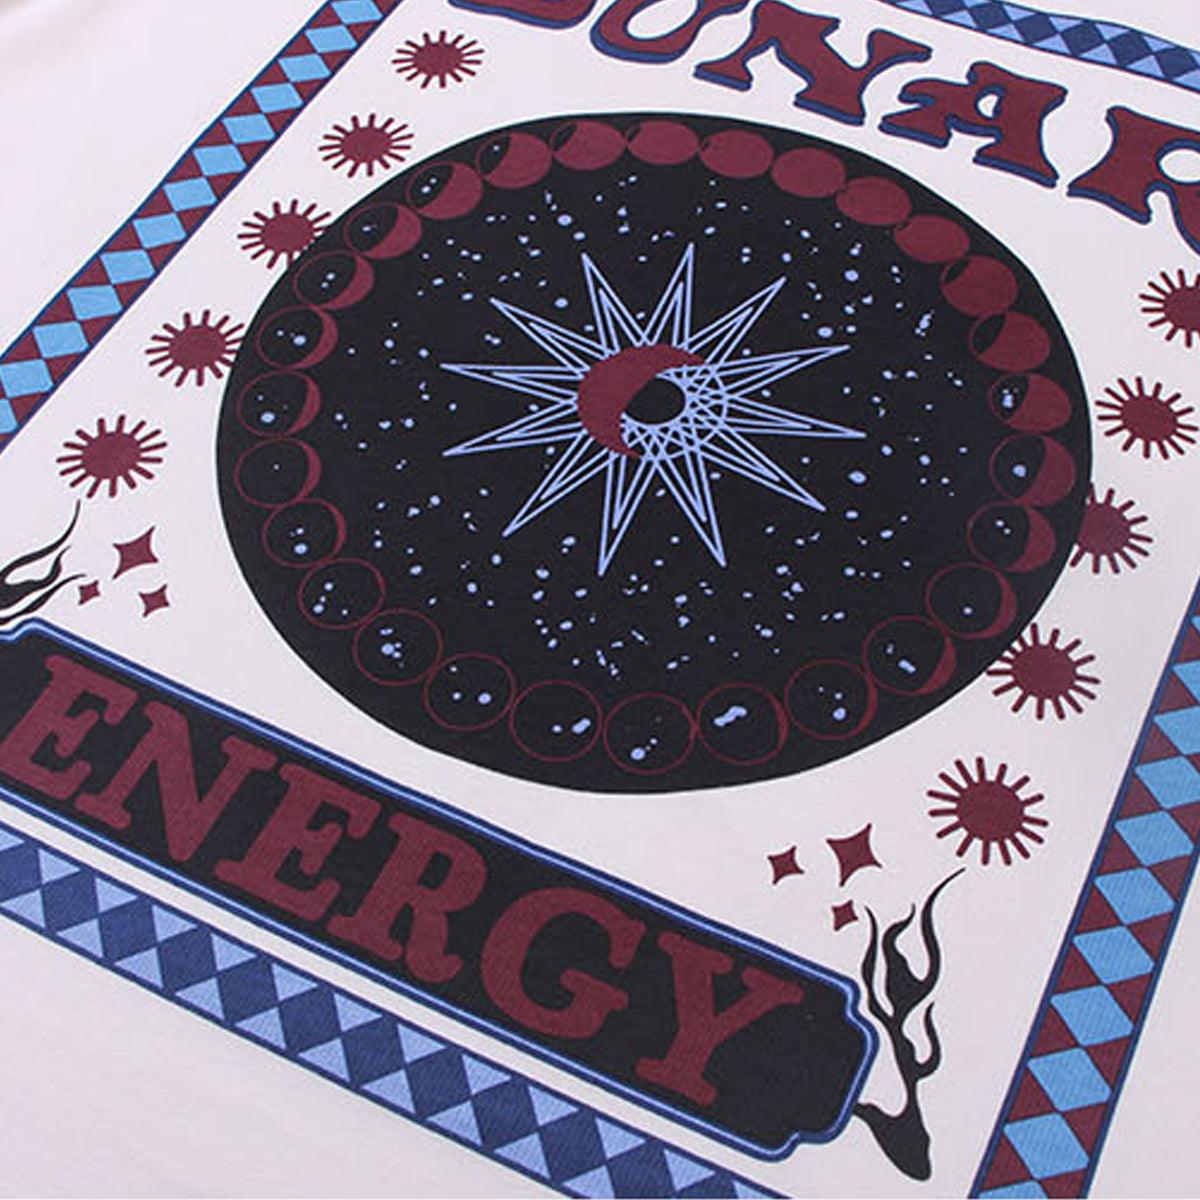 Lunar Energy Indie Aesthetic T-Shirt - Aesthetic Clothes Shop